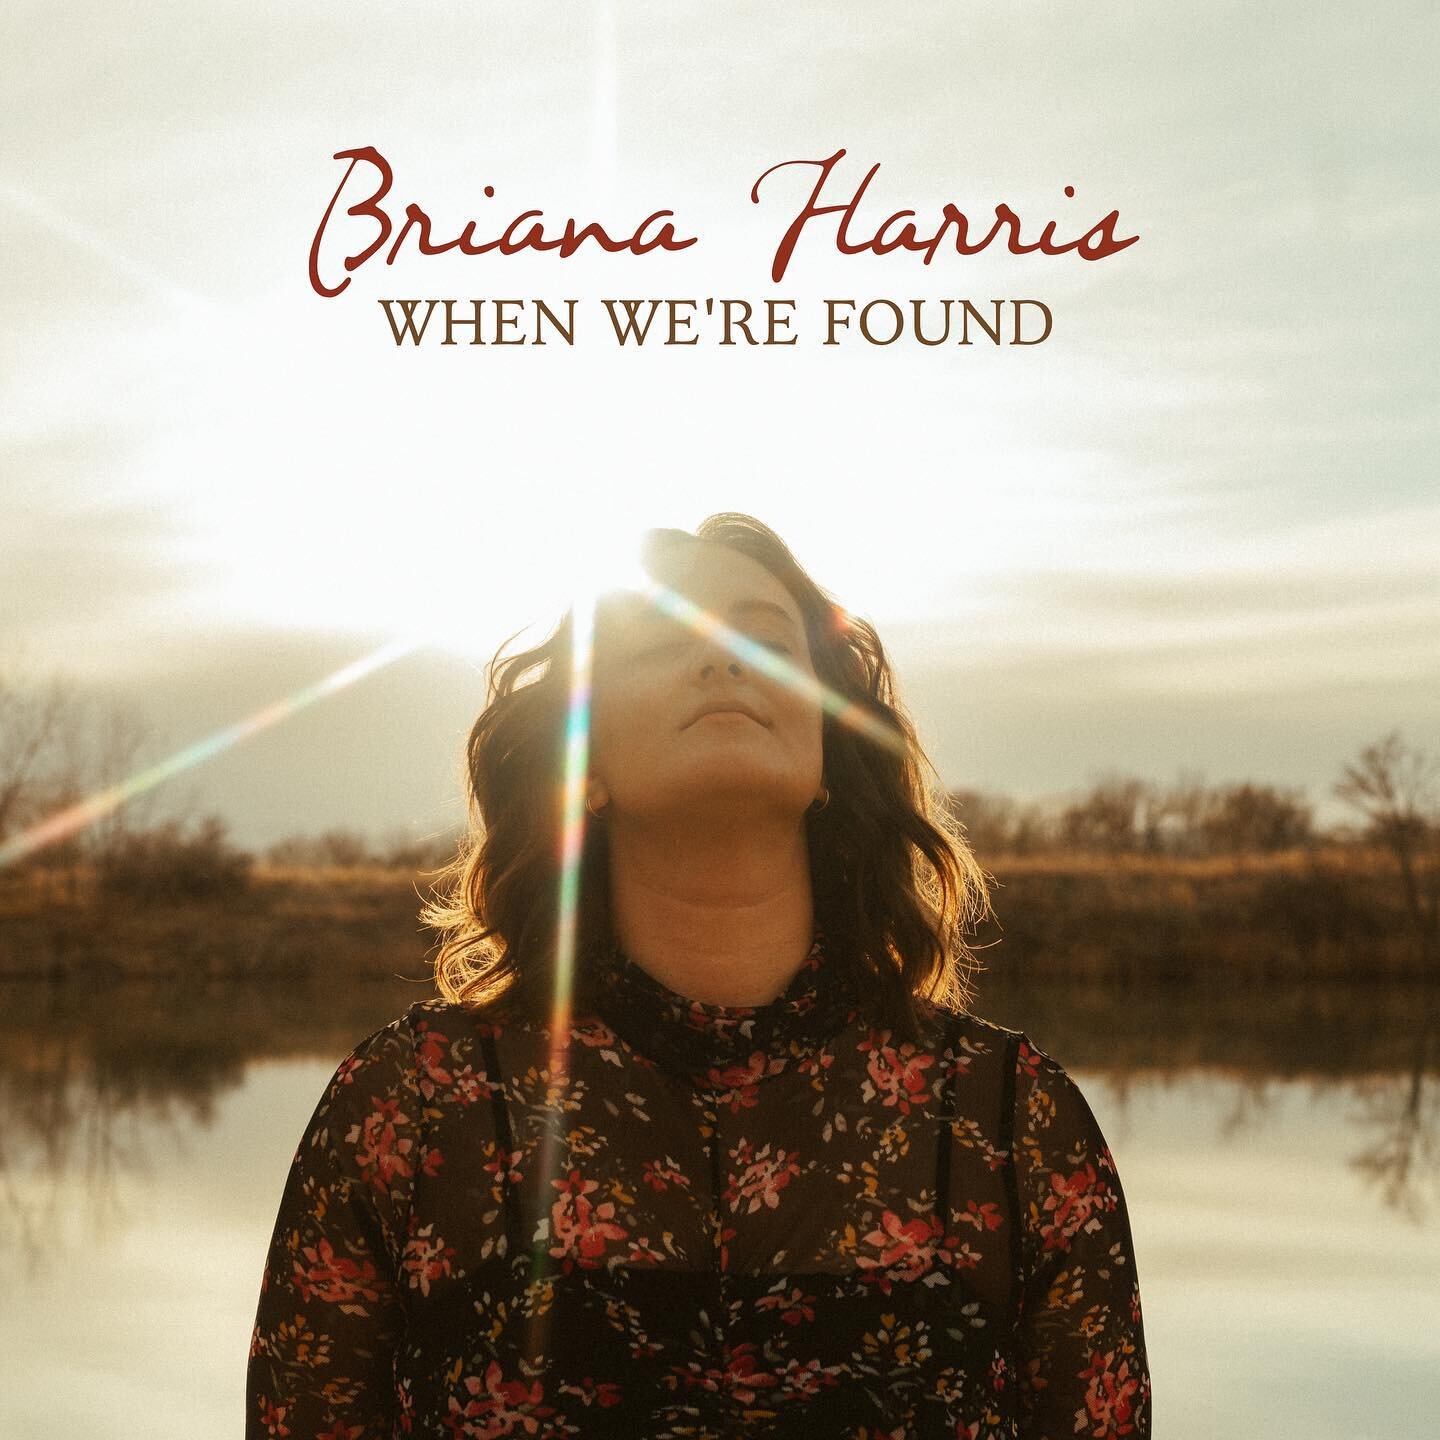 It&rsquo;s here!!! My debut record &ldquo;When We&rsquo;re Found&rdquo; is out and available everywhere you listen to music. 

The theme that emerged from this record was the idea of wanting to be seen and known. Being seen was never about striving t